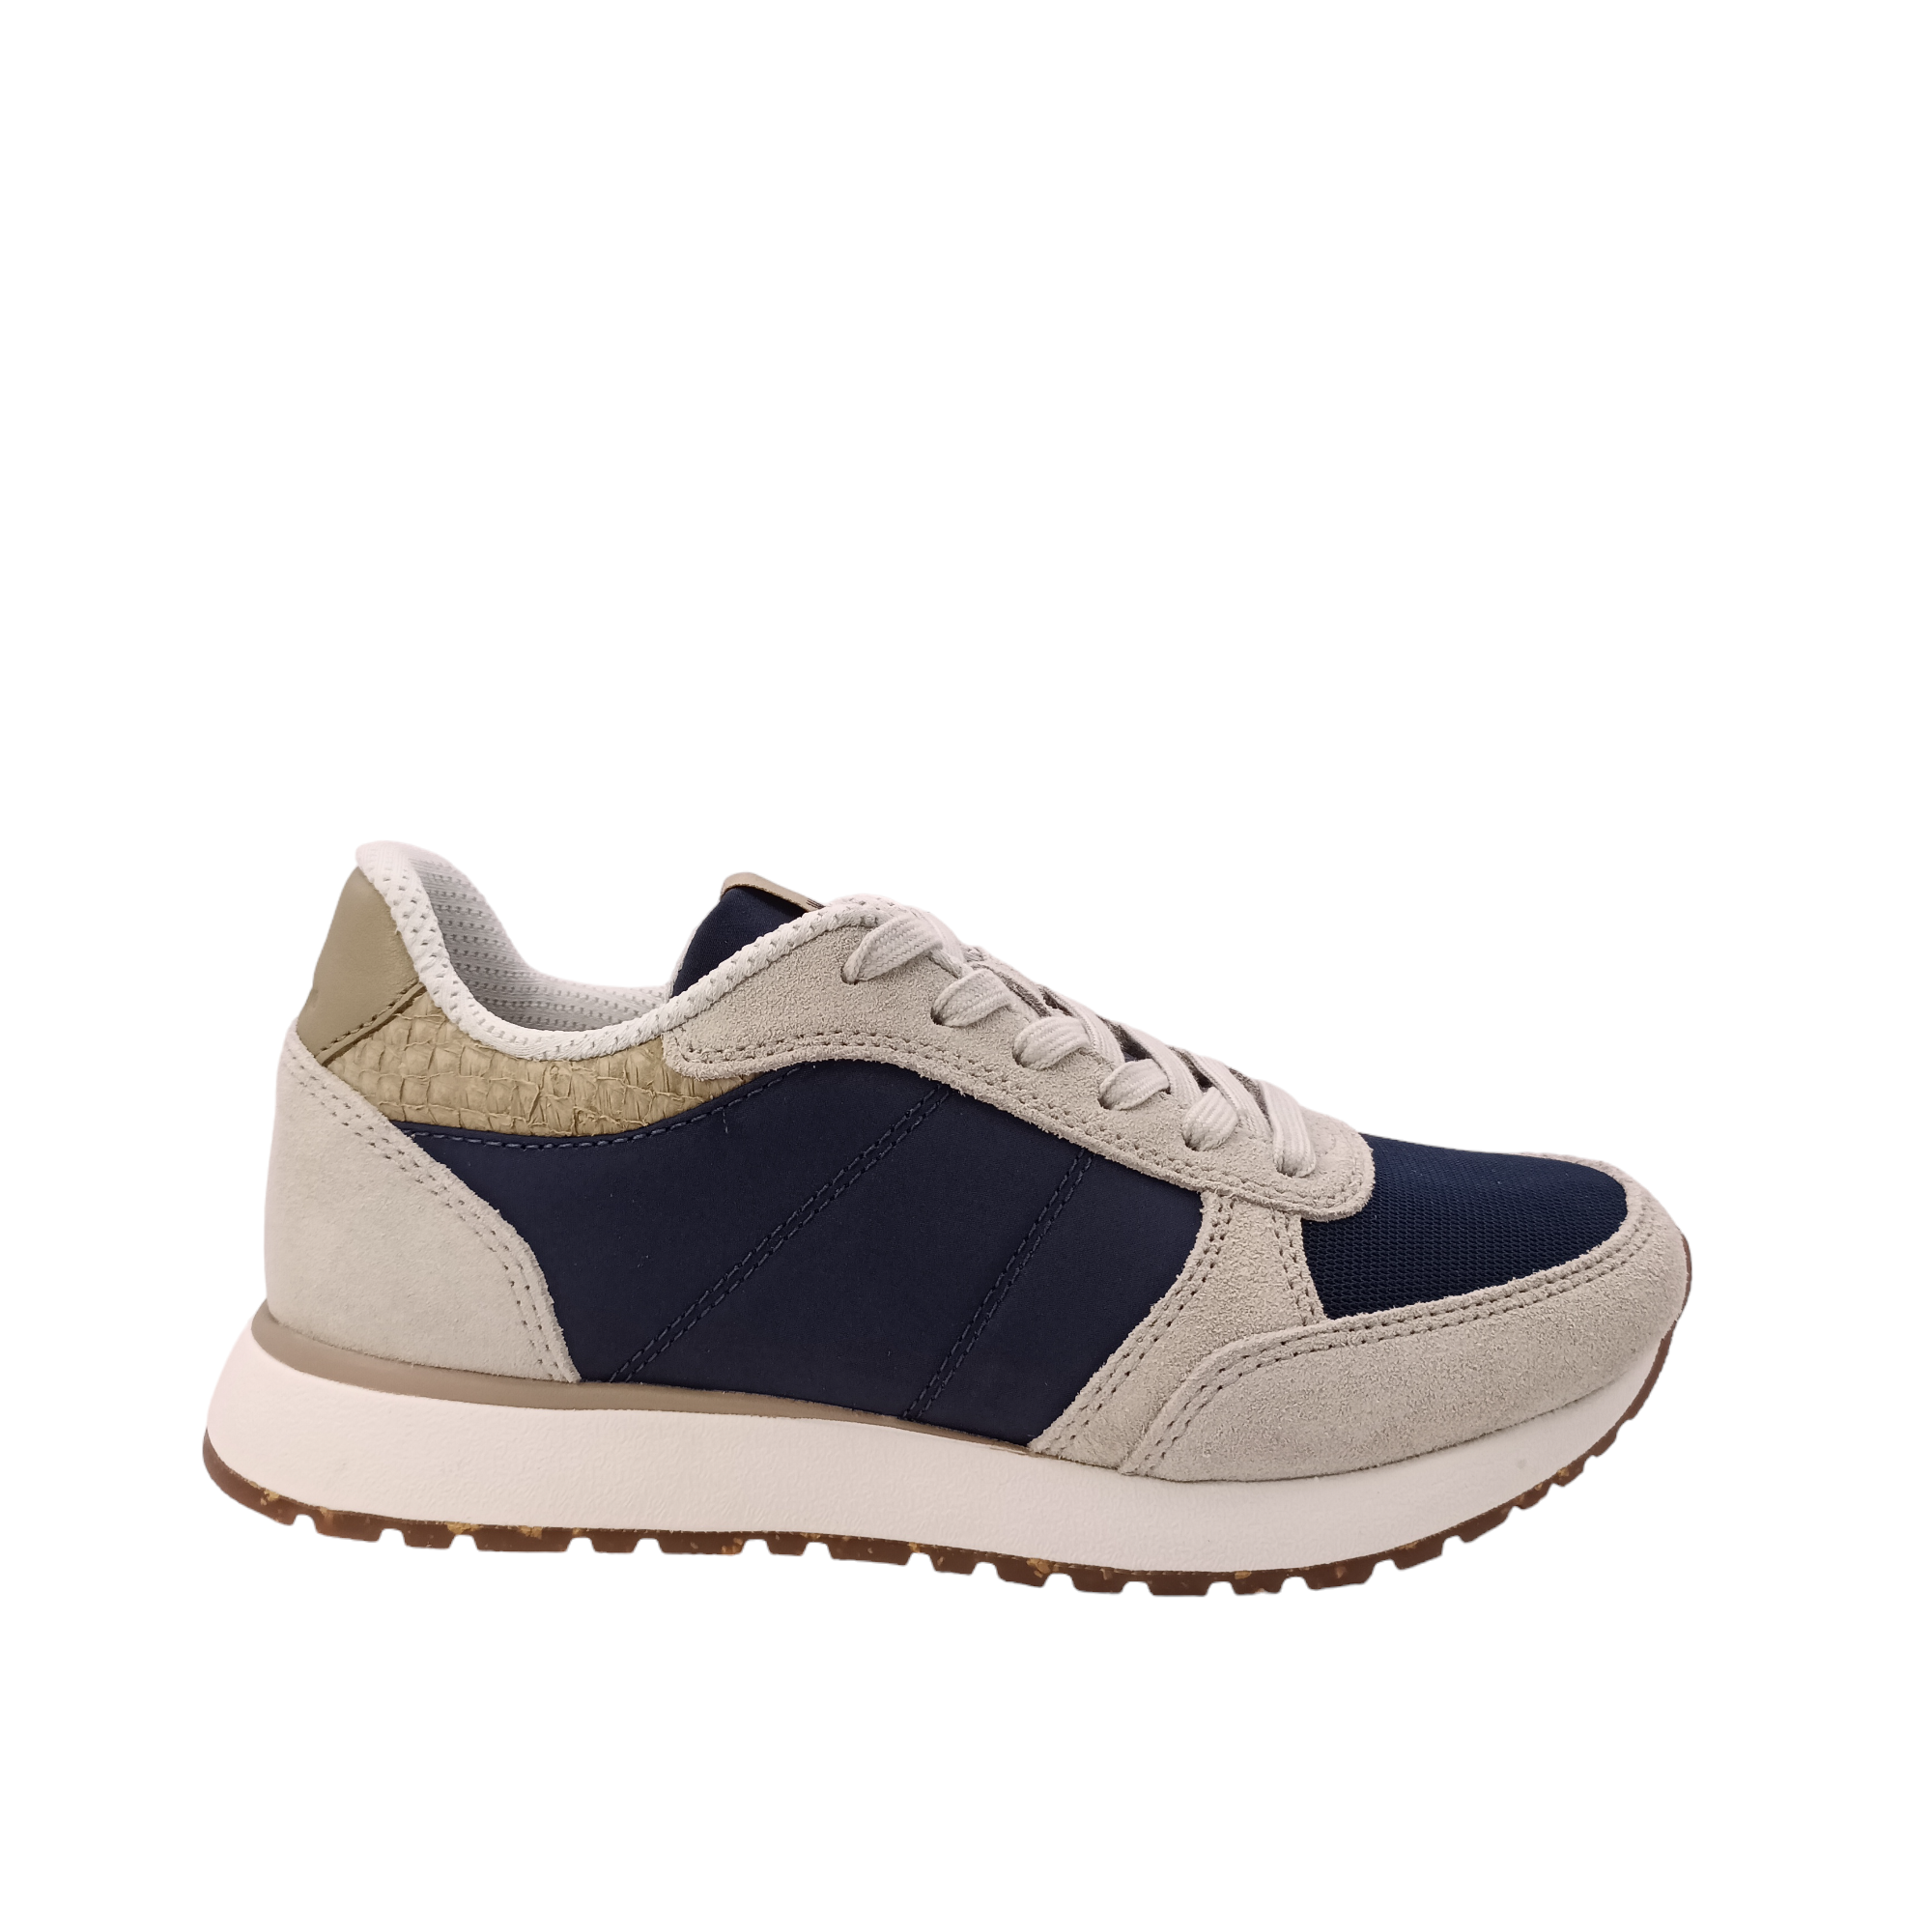 Shop Ronja Woden - with shoe&me - from Woden - Sneaker - Sneaker, Winter, Womens - [collection]